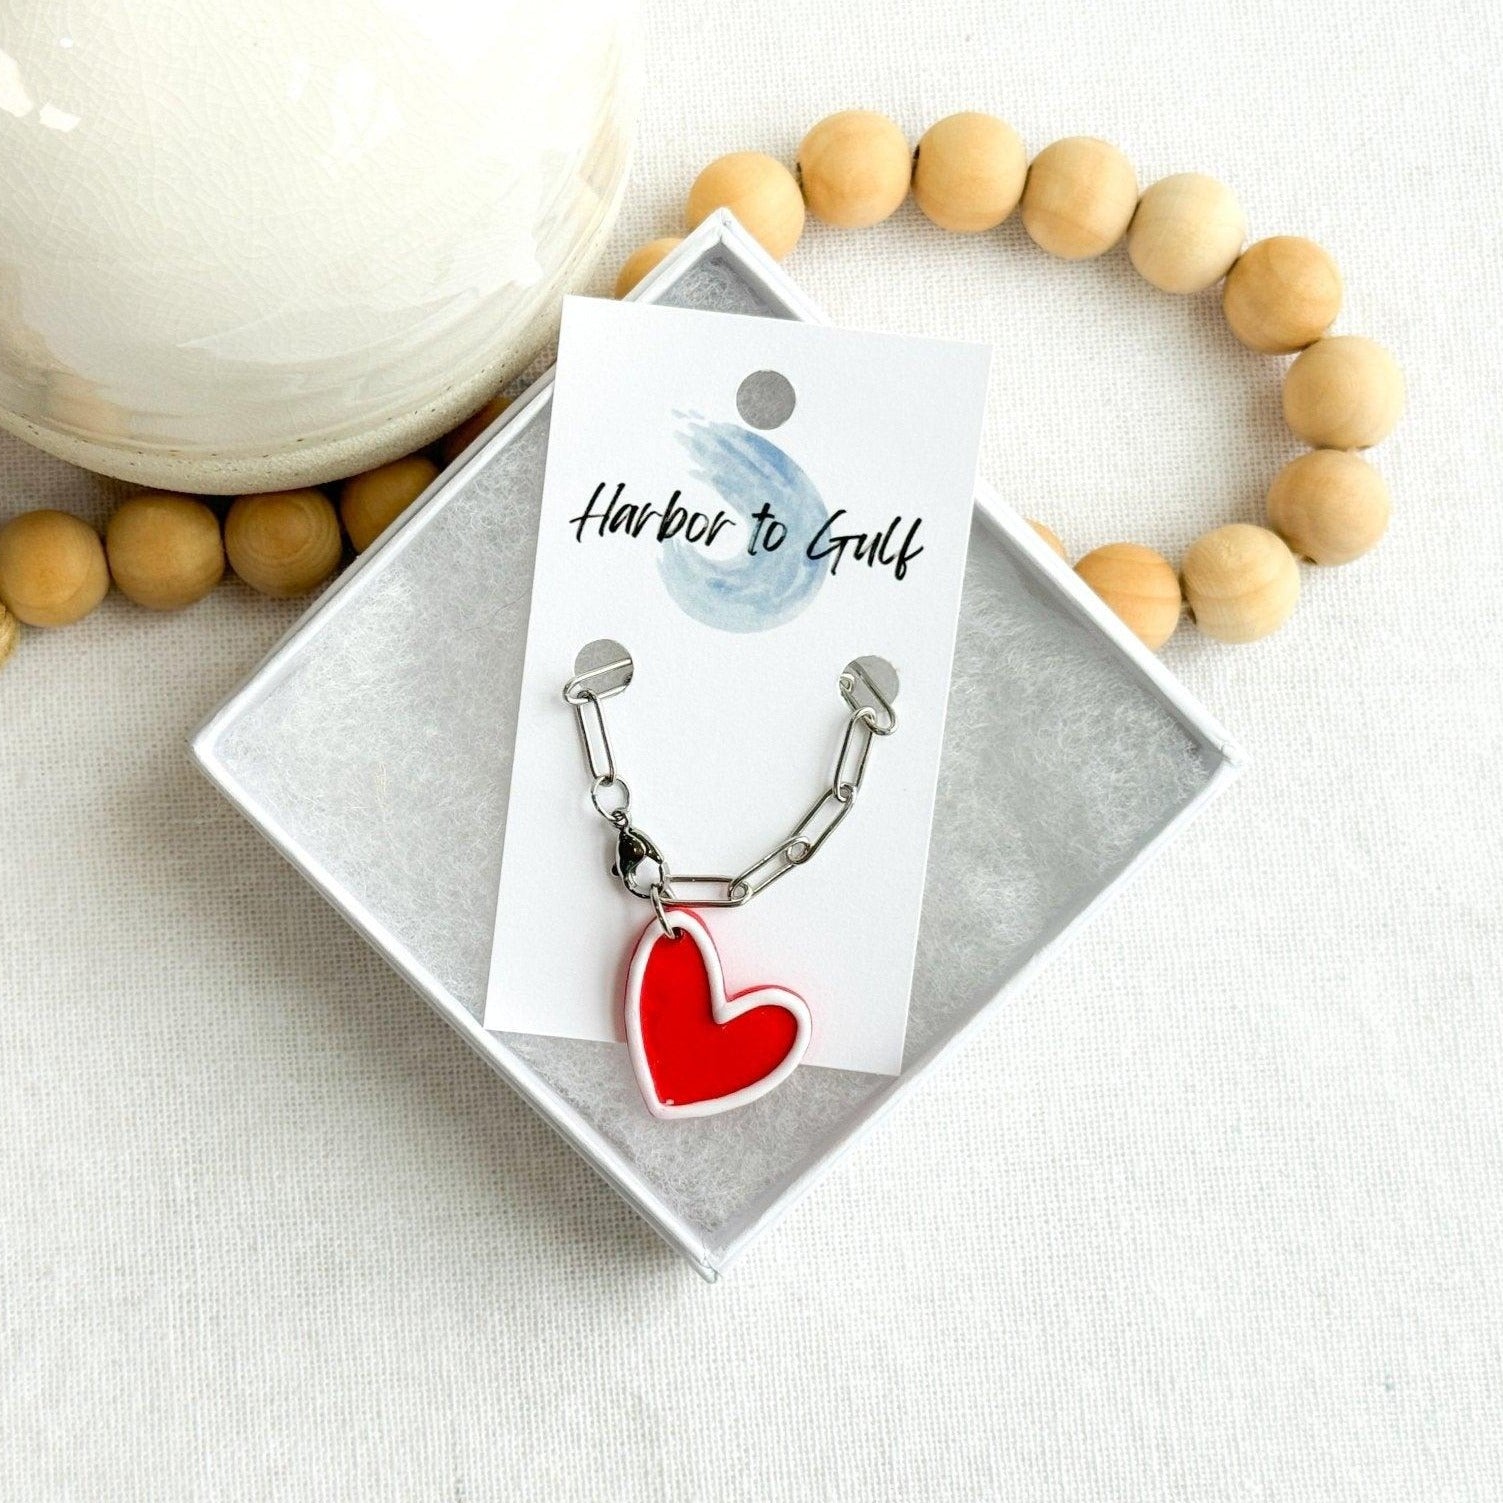 Red Heart Charm, Stanley Cup Accessories - Harbor to Gulf